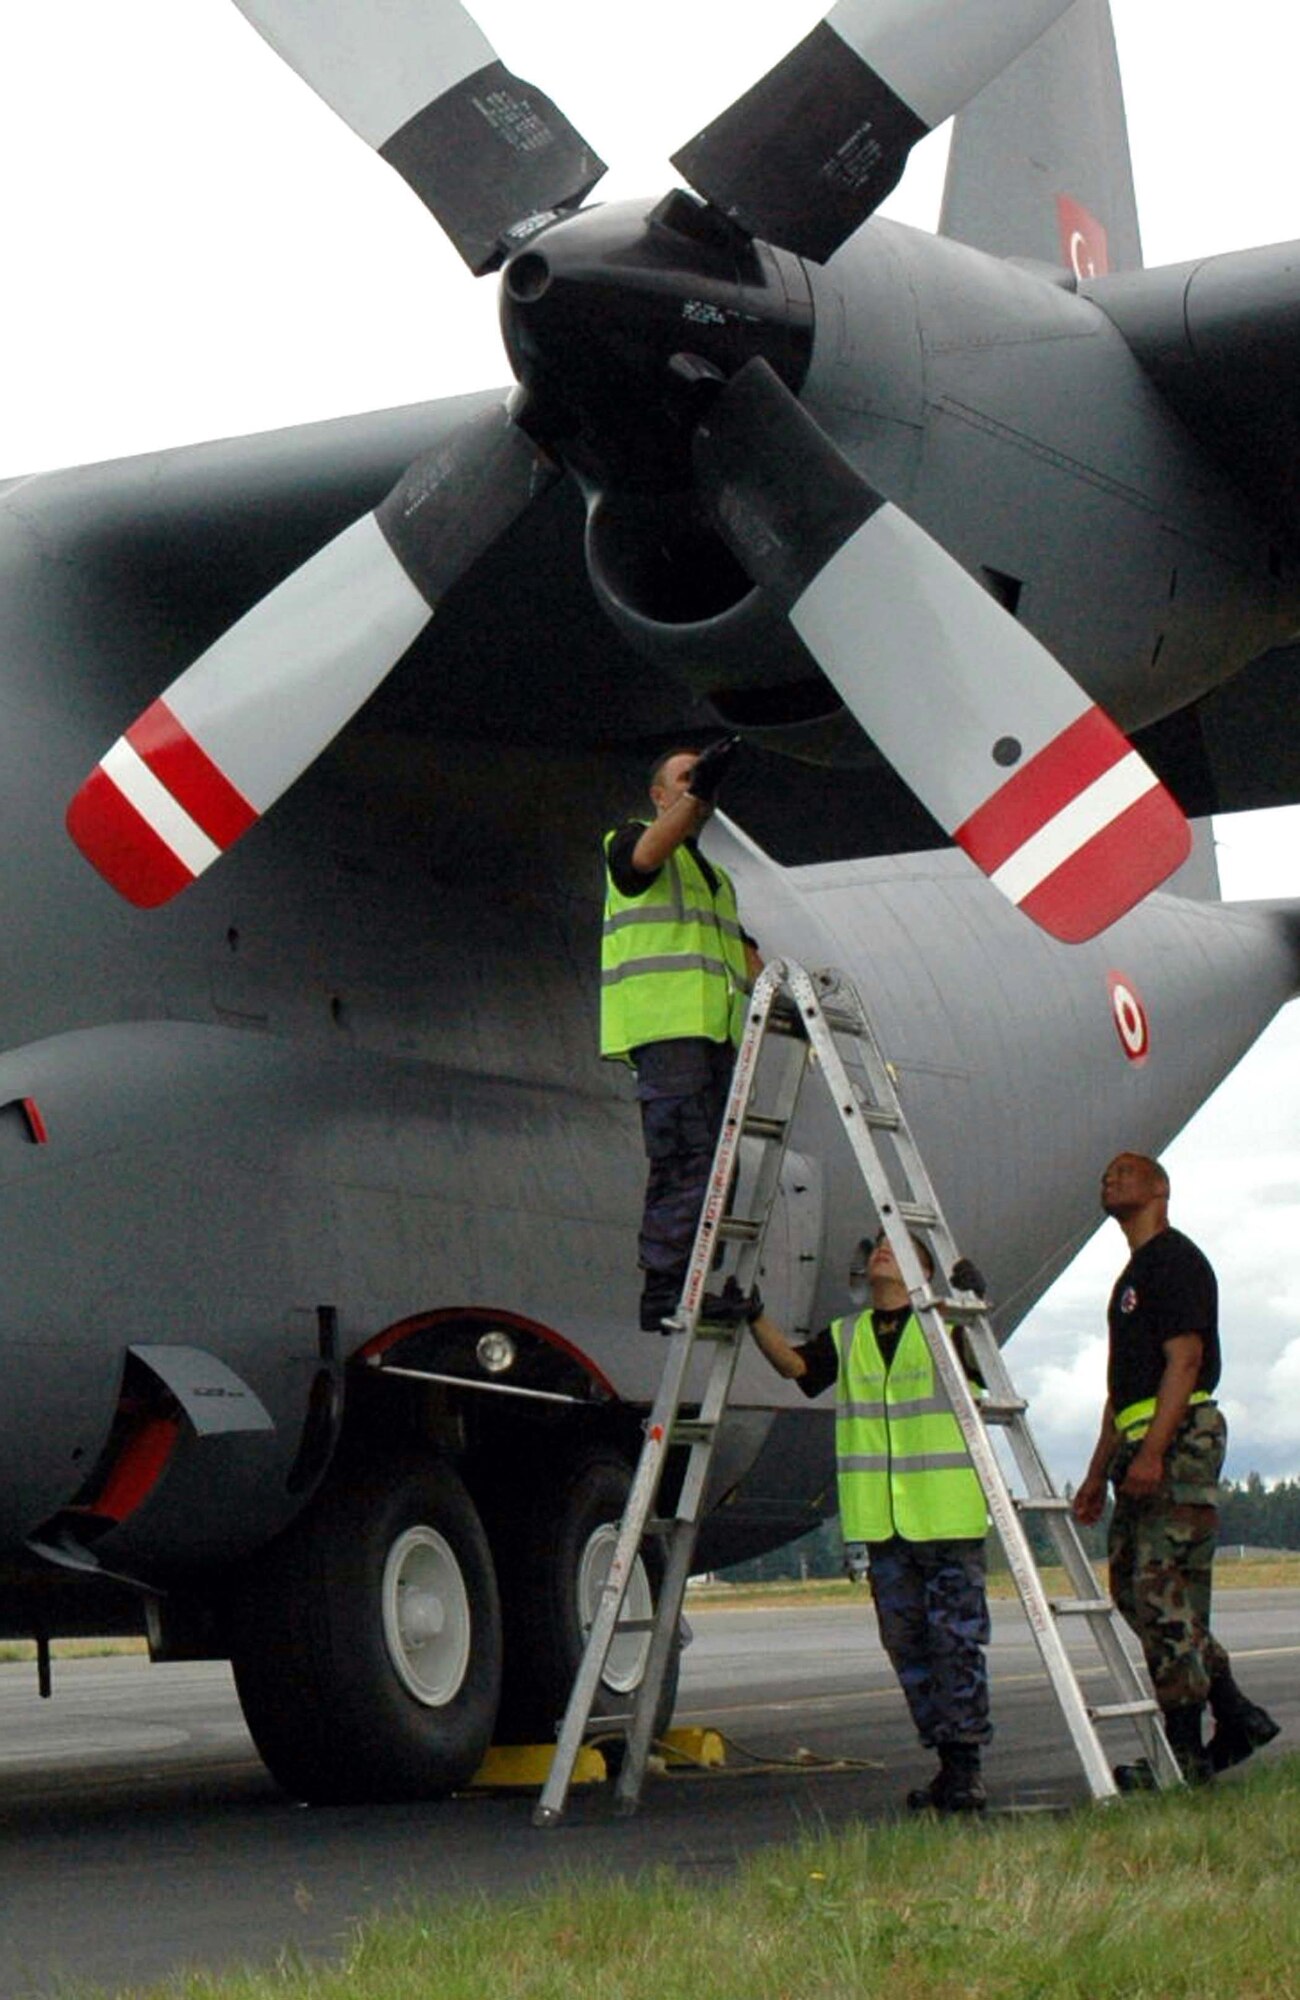 Tech. Sgt. Trey Woodward, 446th Aircraft Maintenance Squadron, performs one final check of Turkey's C-130E before its first flight at the Air Mobility Command Rodeo 2007. Sergeant Woodward worked side by side with Turkish maintainers to perform emergency maintenance on their airplane, enabling the team to fly in the competition. (U.S. Air Force Photo/Staff Sgt. Nick Przybyciel)